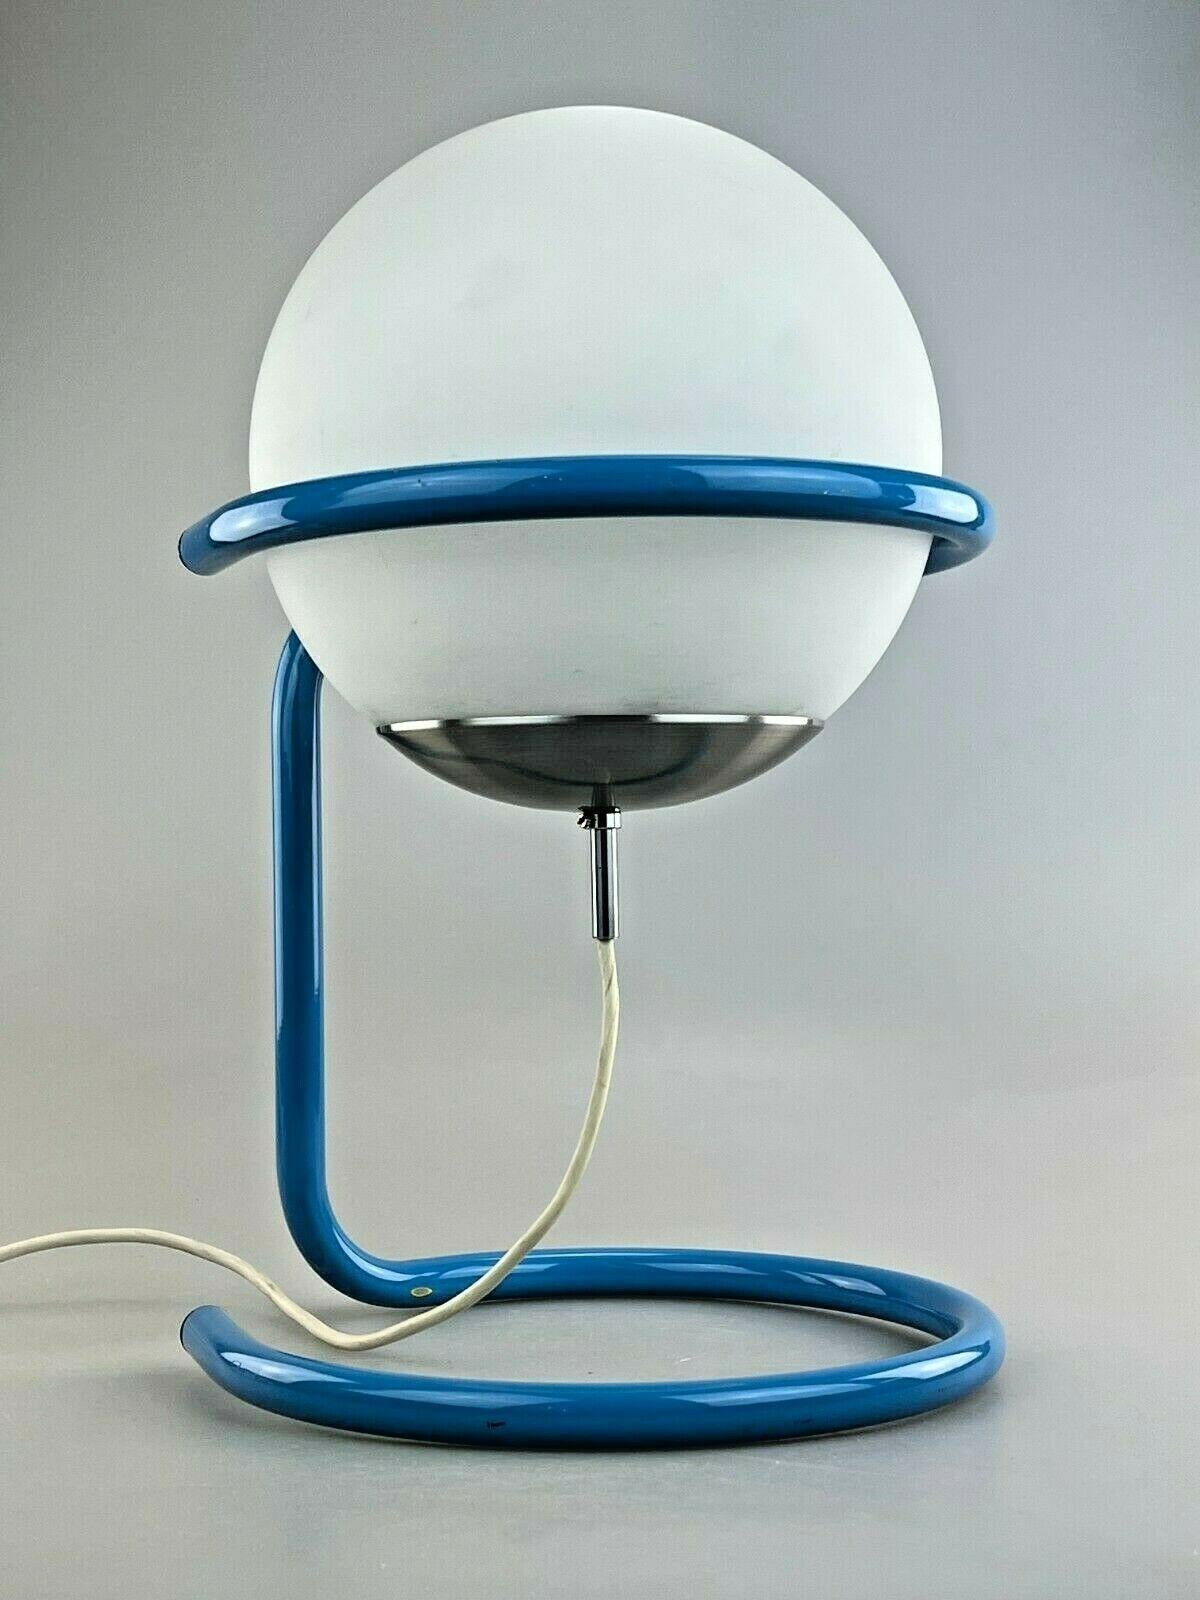 60s 70s ball lamp lamp table lamp Archi Design Space Age Netherlands

Object: spherical lamp

Manufacturer:

Condition: good - vintage

Age: around 1960-1970

Dimensions:

Diameter = 29cm
Height = 45cm

Other notes:

The pictures